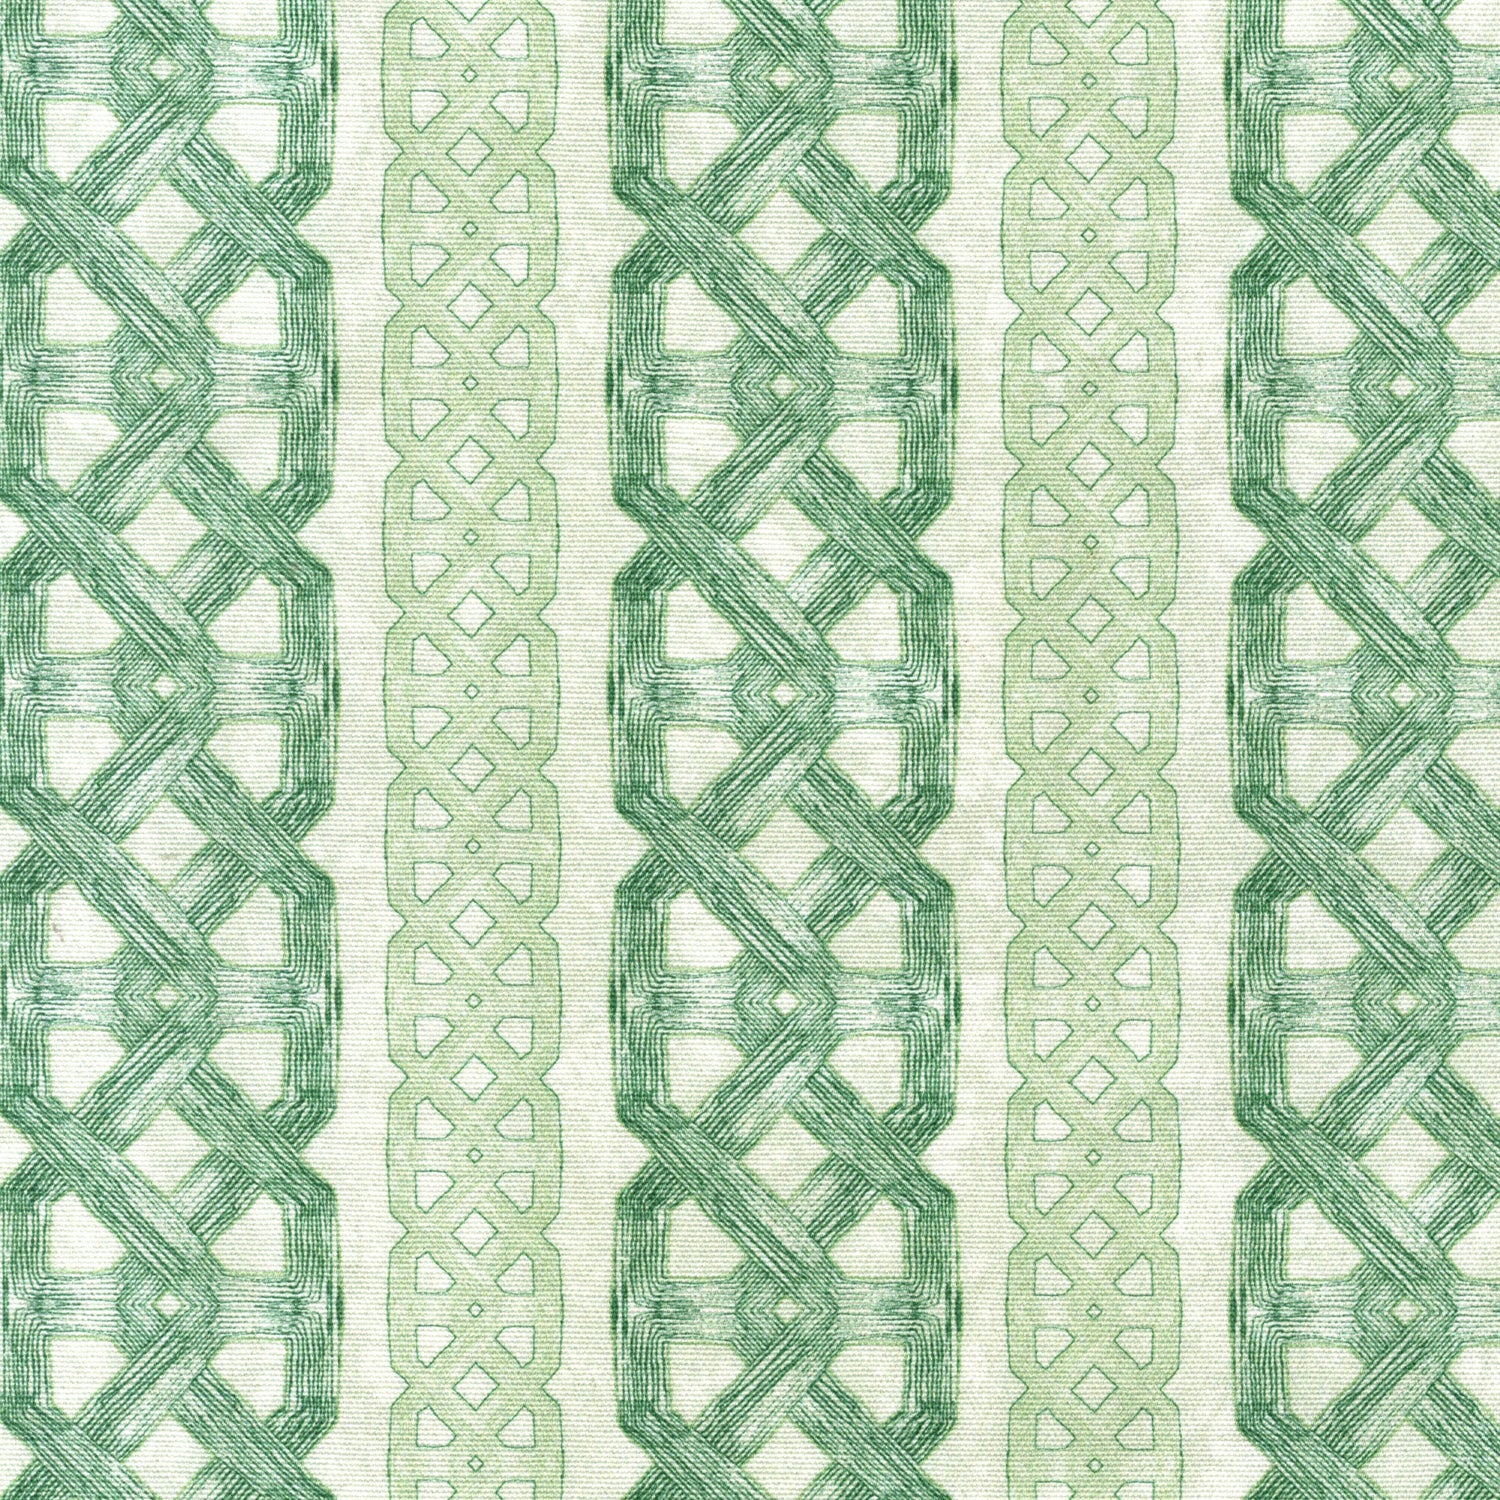 Detail of fabric in a geometric stripe print in shades of green on a mottled field.